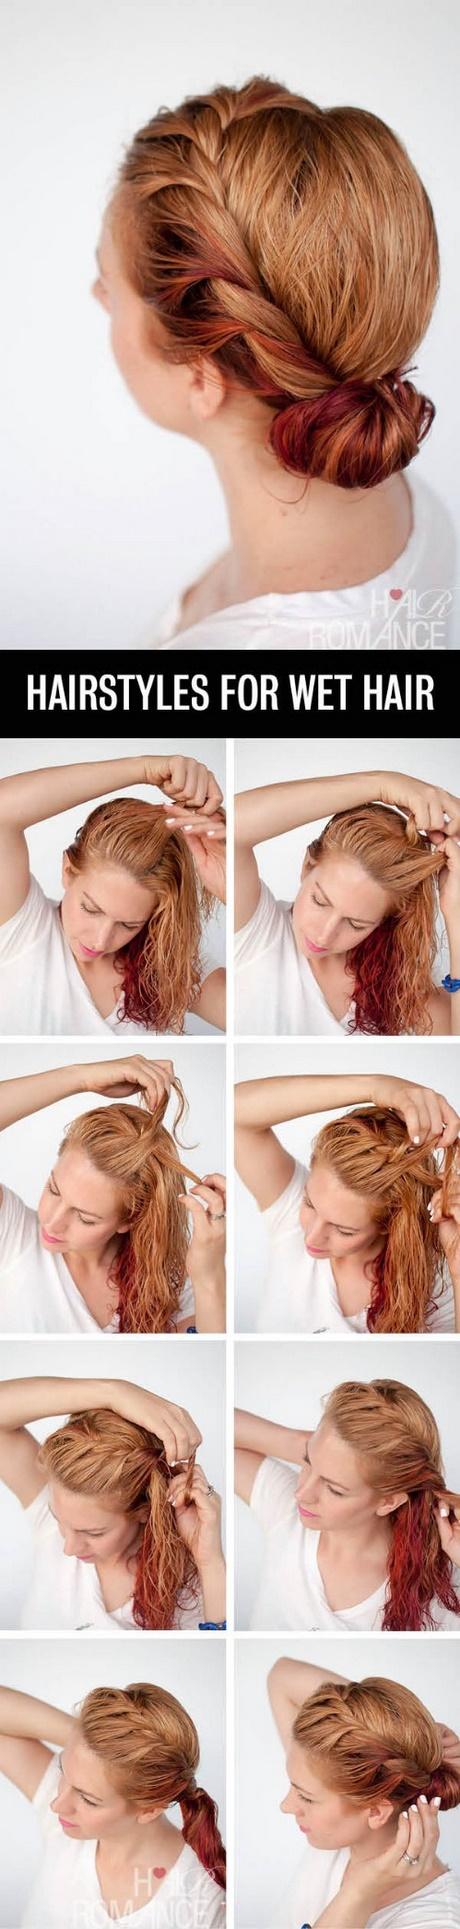 Easy updos for long curly hair easy-updos-for-long-curly-hair-19_9